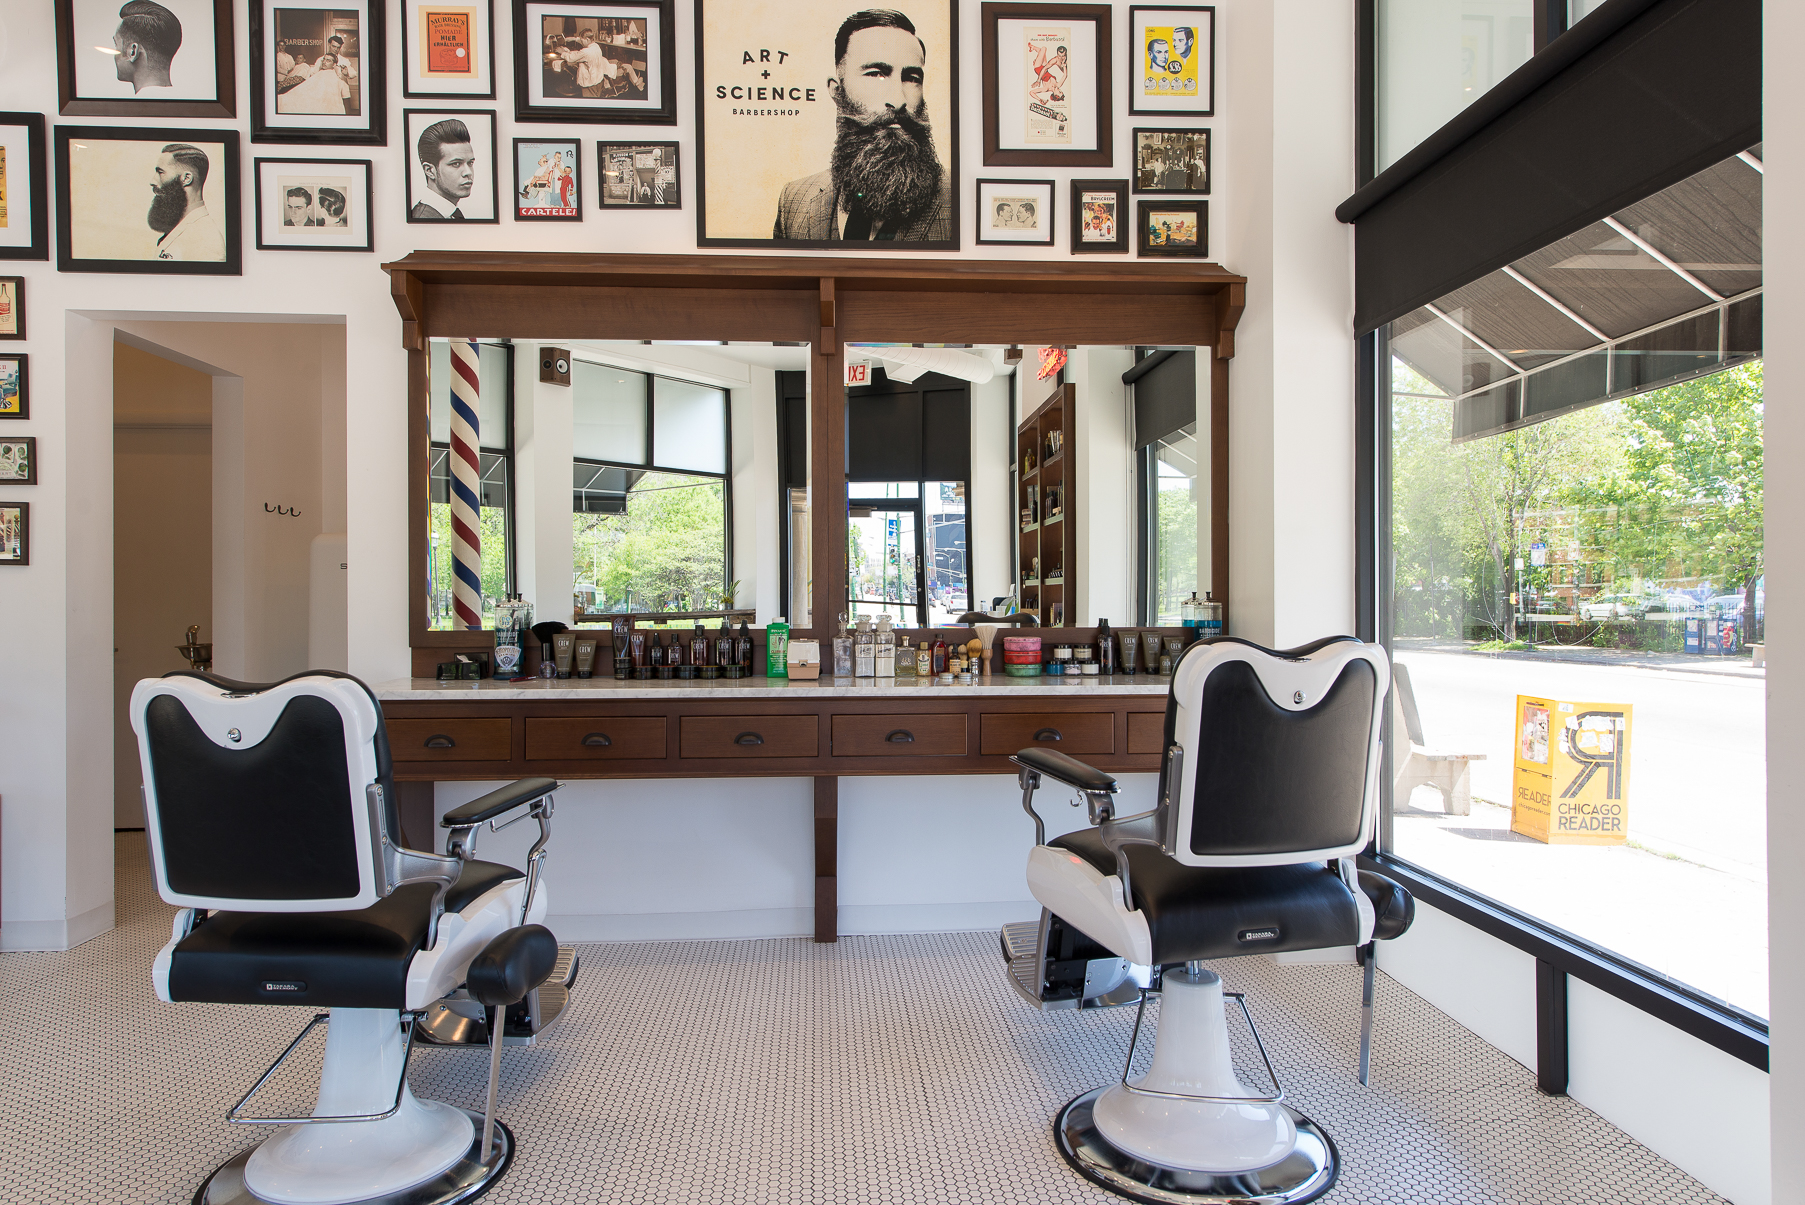 Barber Shop dreams meaning - Interpretation and Meaning